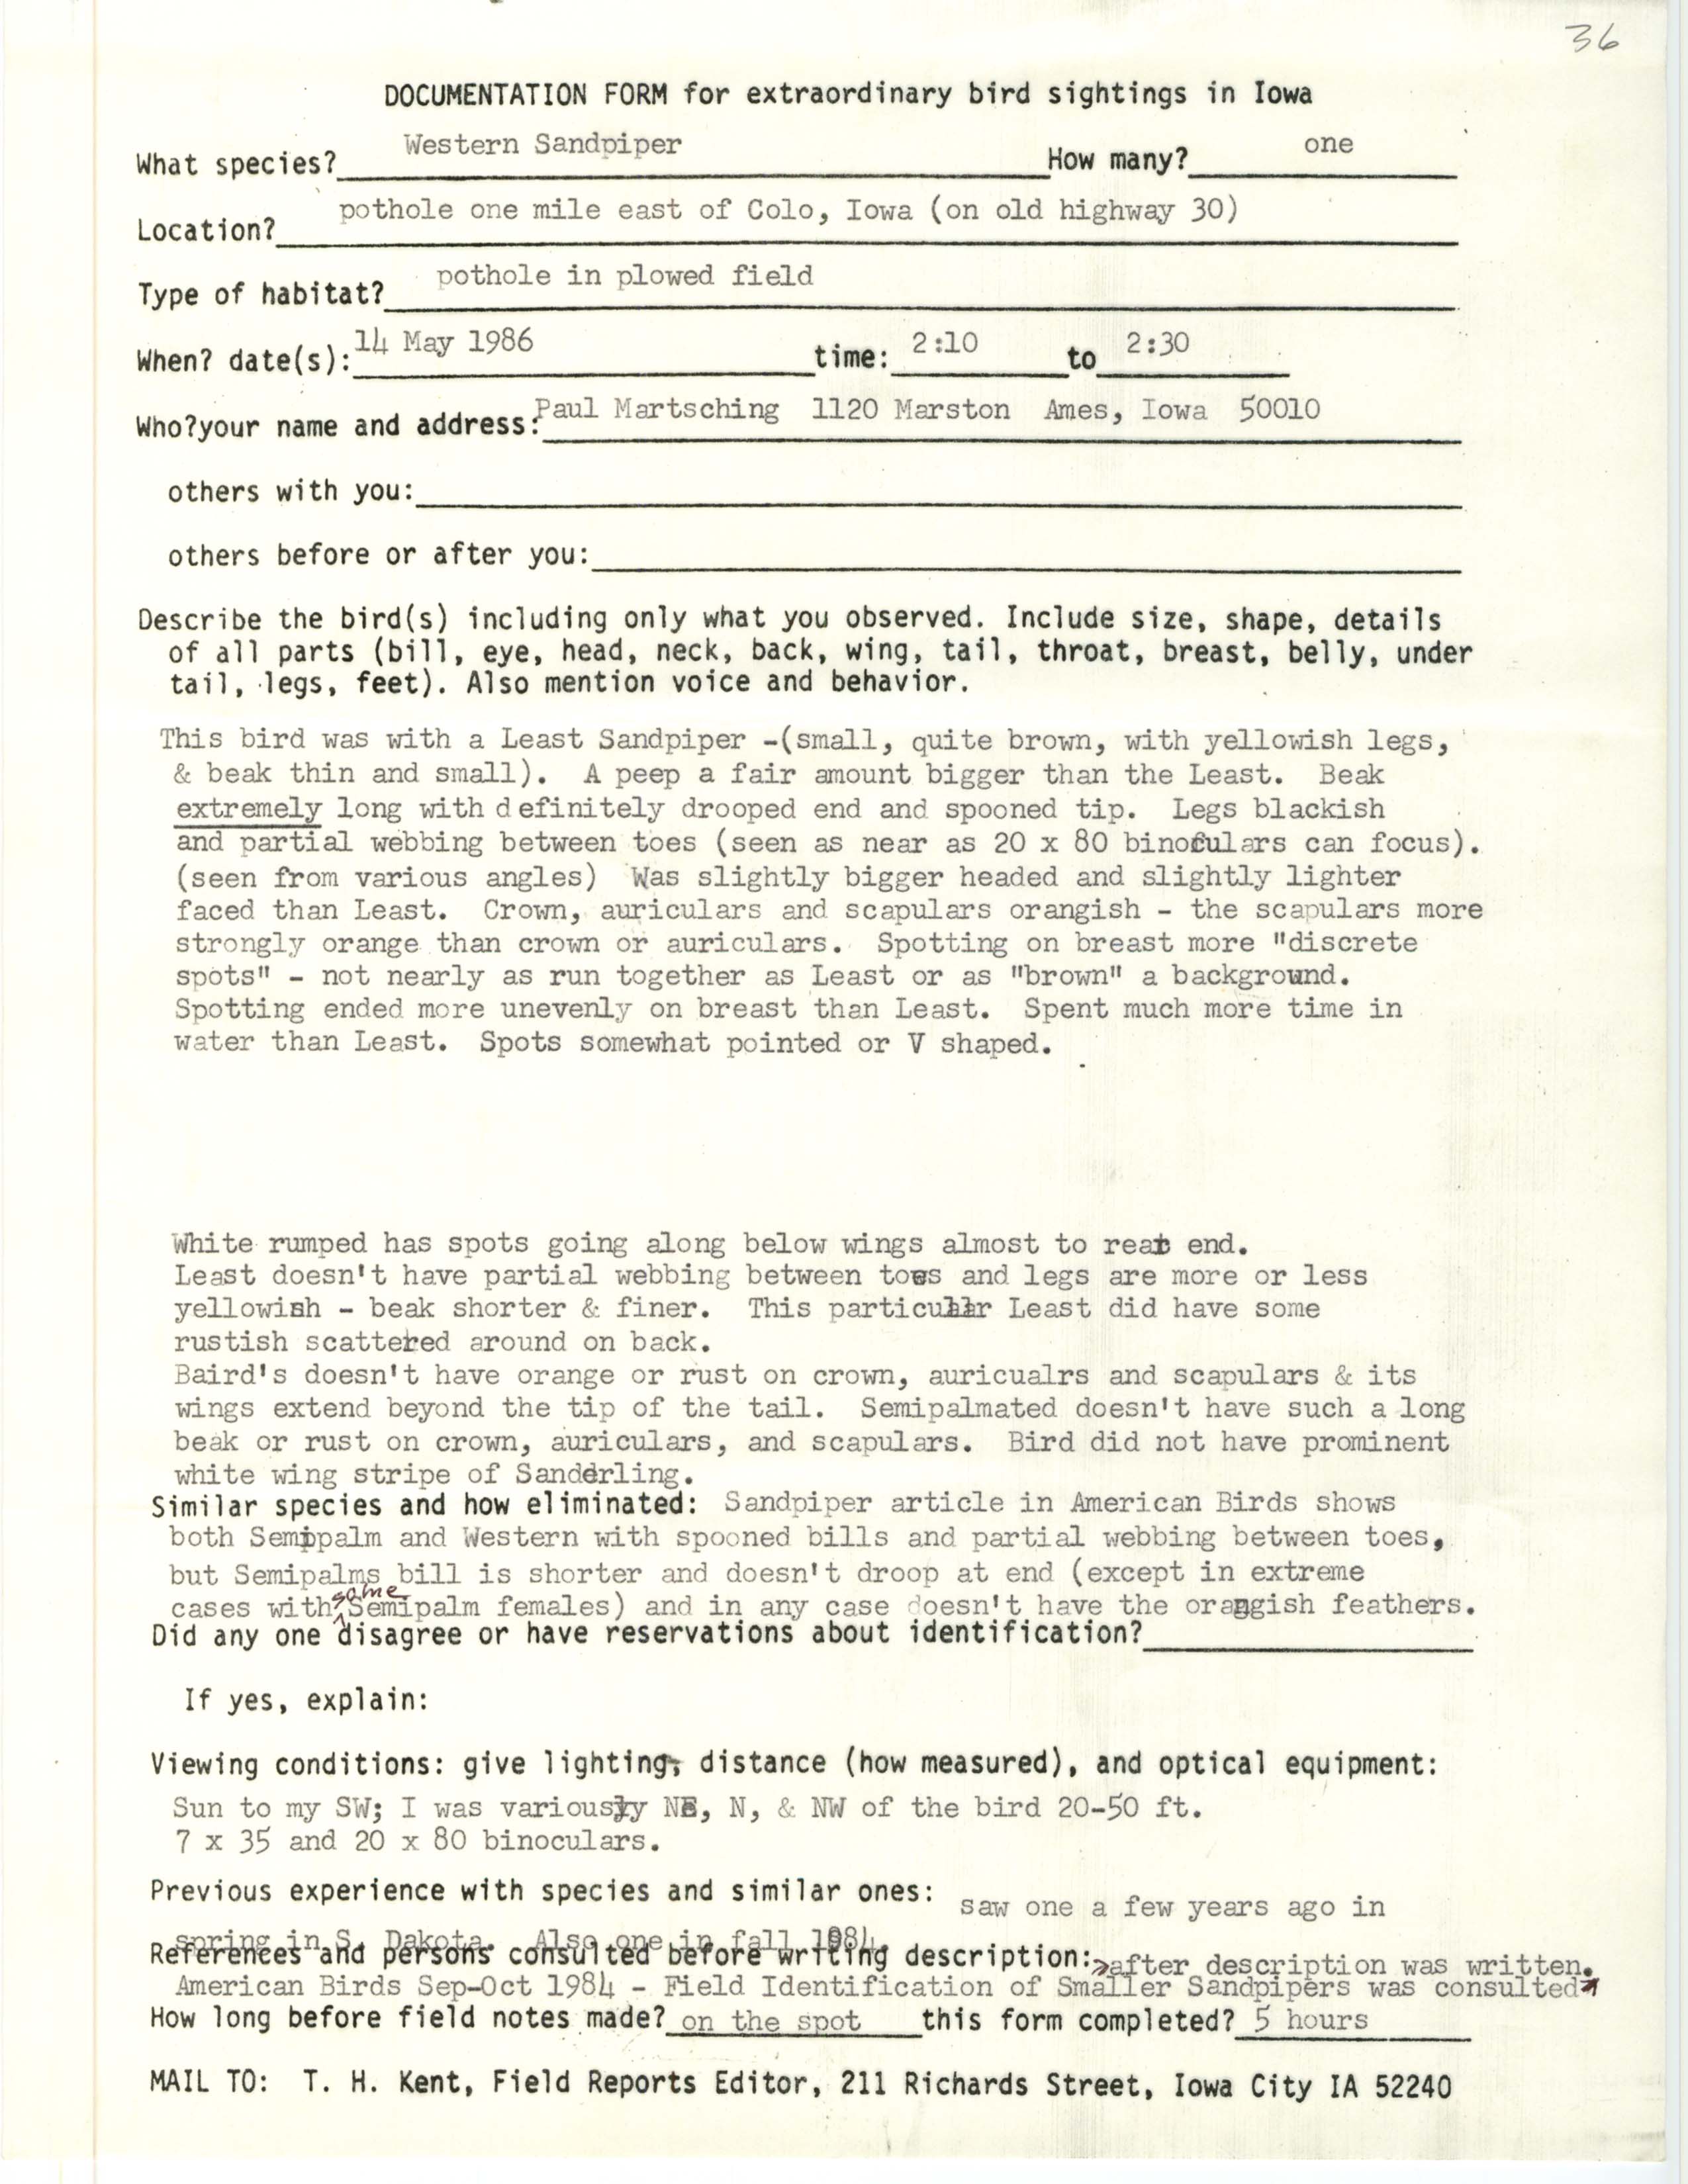 Rare bird documentation form for Western Sandpiper east of Colo, 1986